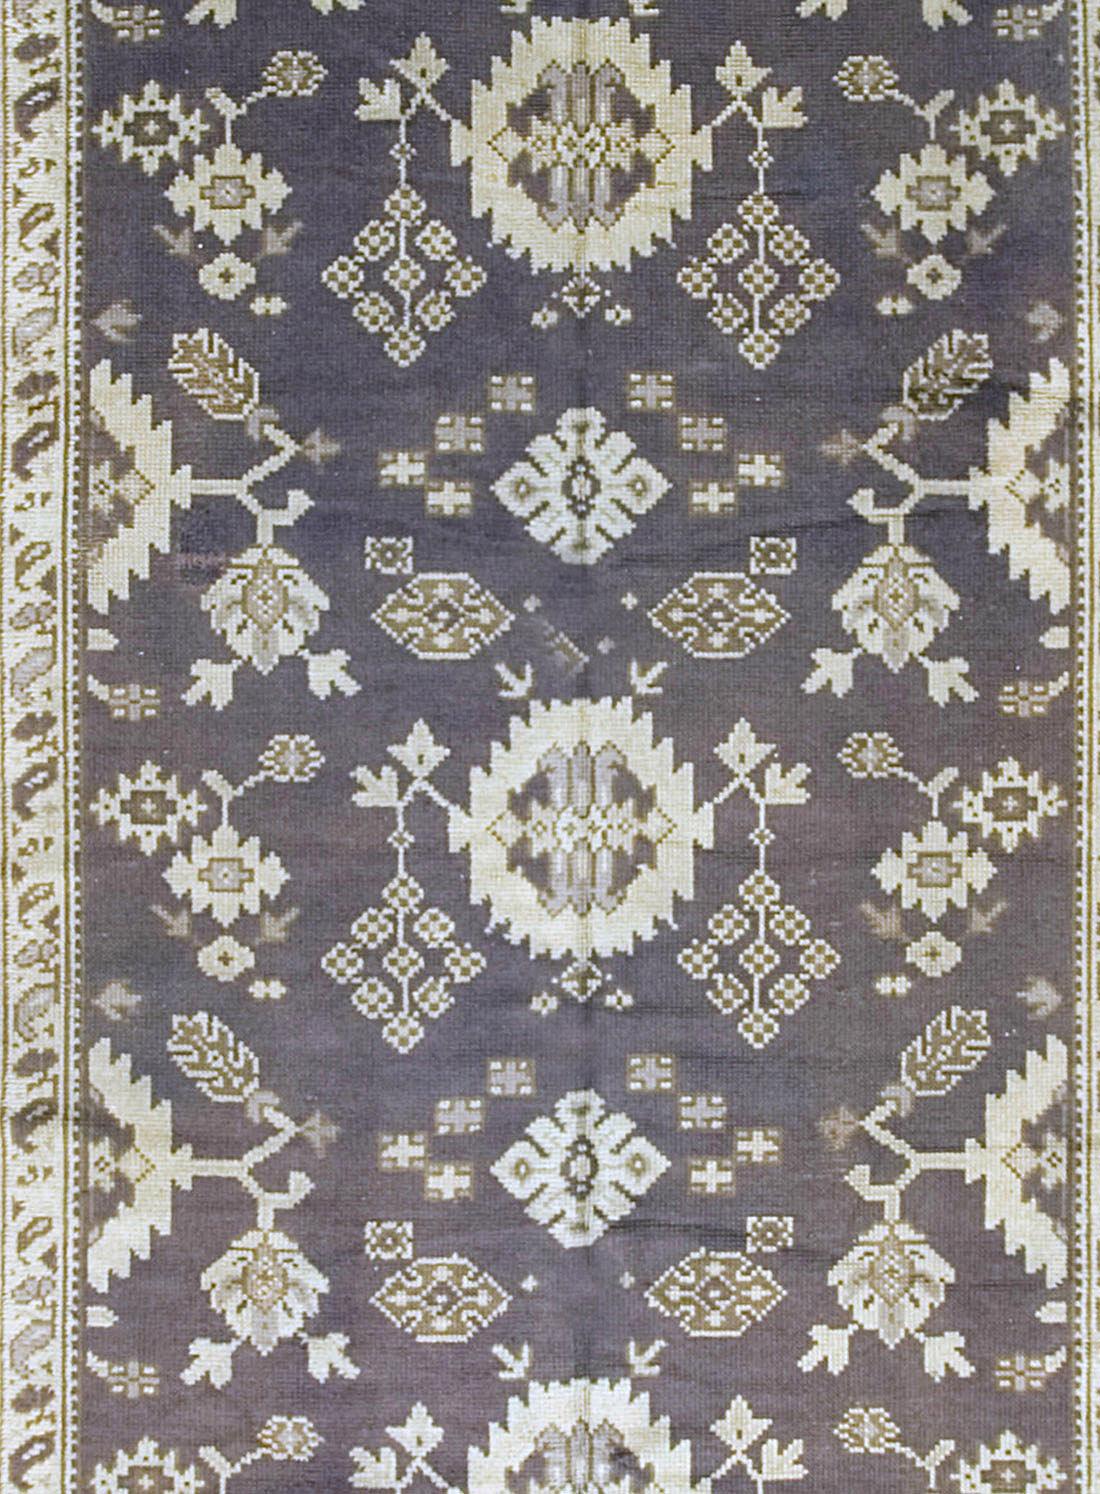 Antique Irish Donegal Arts & Crafts Runner Rug, circa 1900  6' x 14'11 In Good Condition For Sale In New York, NY